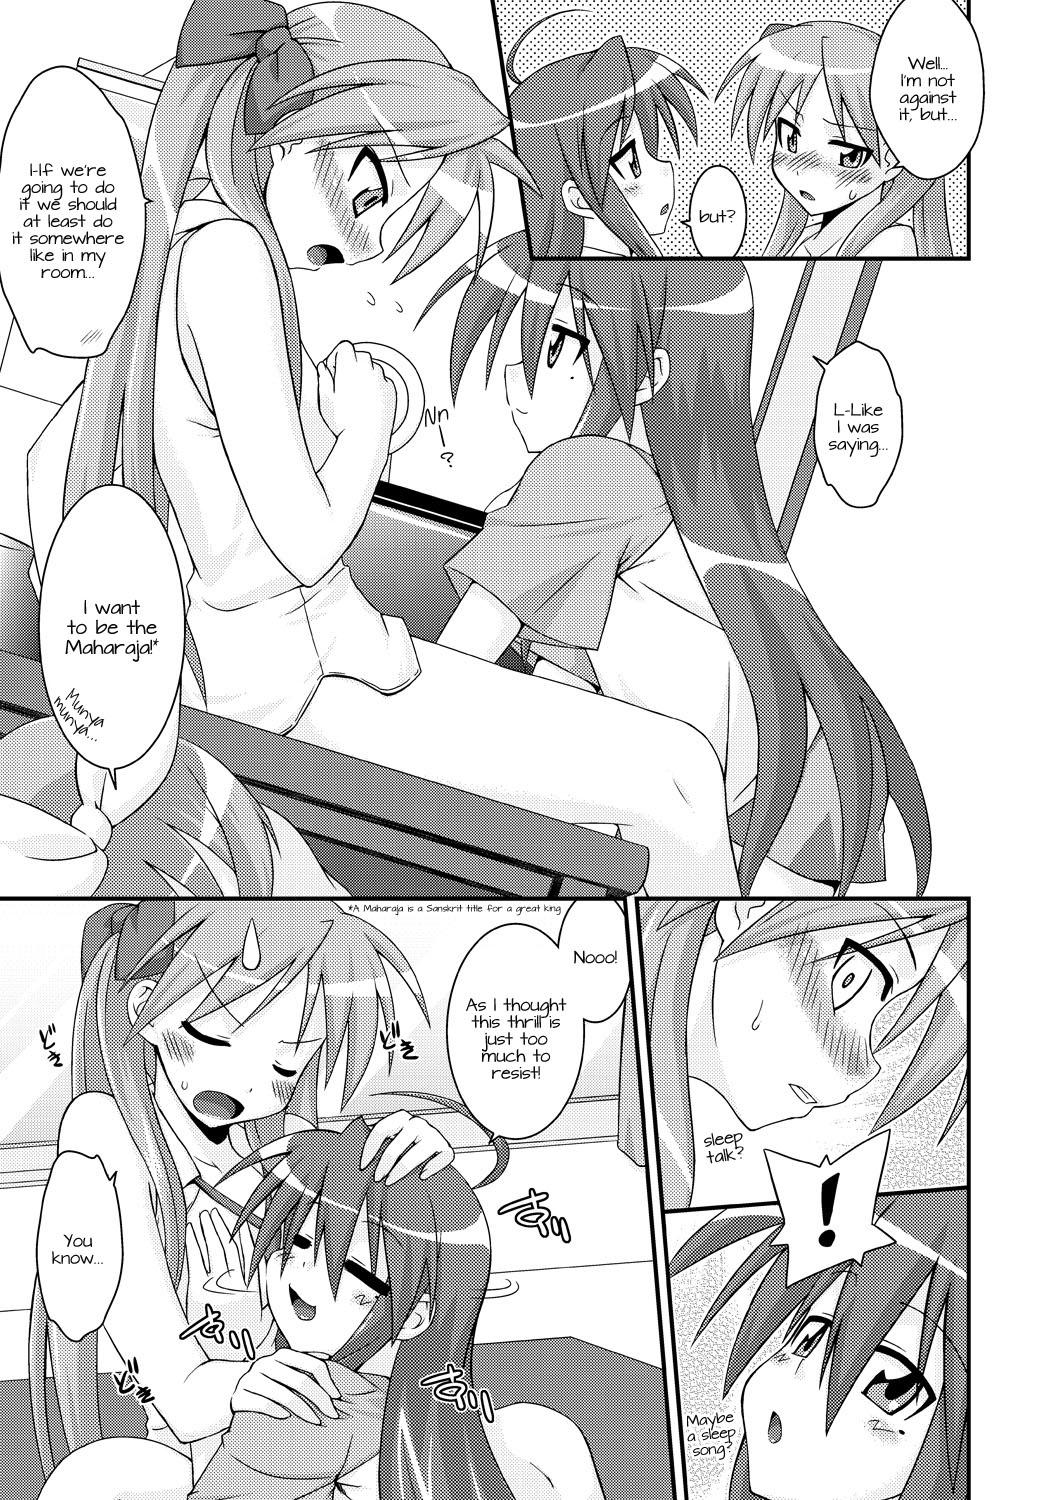 Pounded Jam Star - Lucky star Panty - Page 6